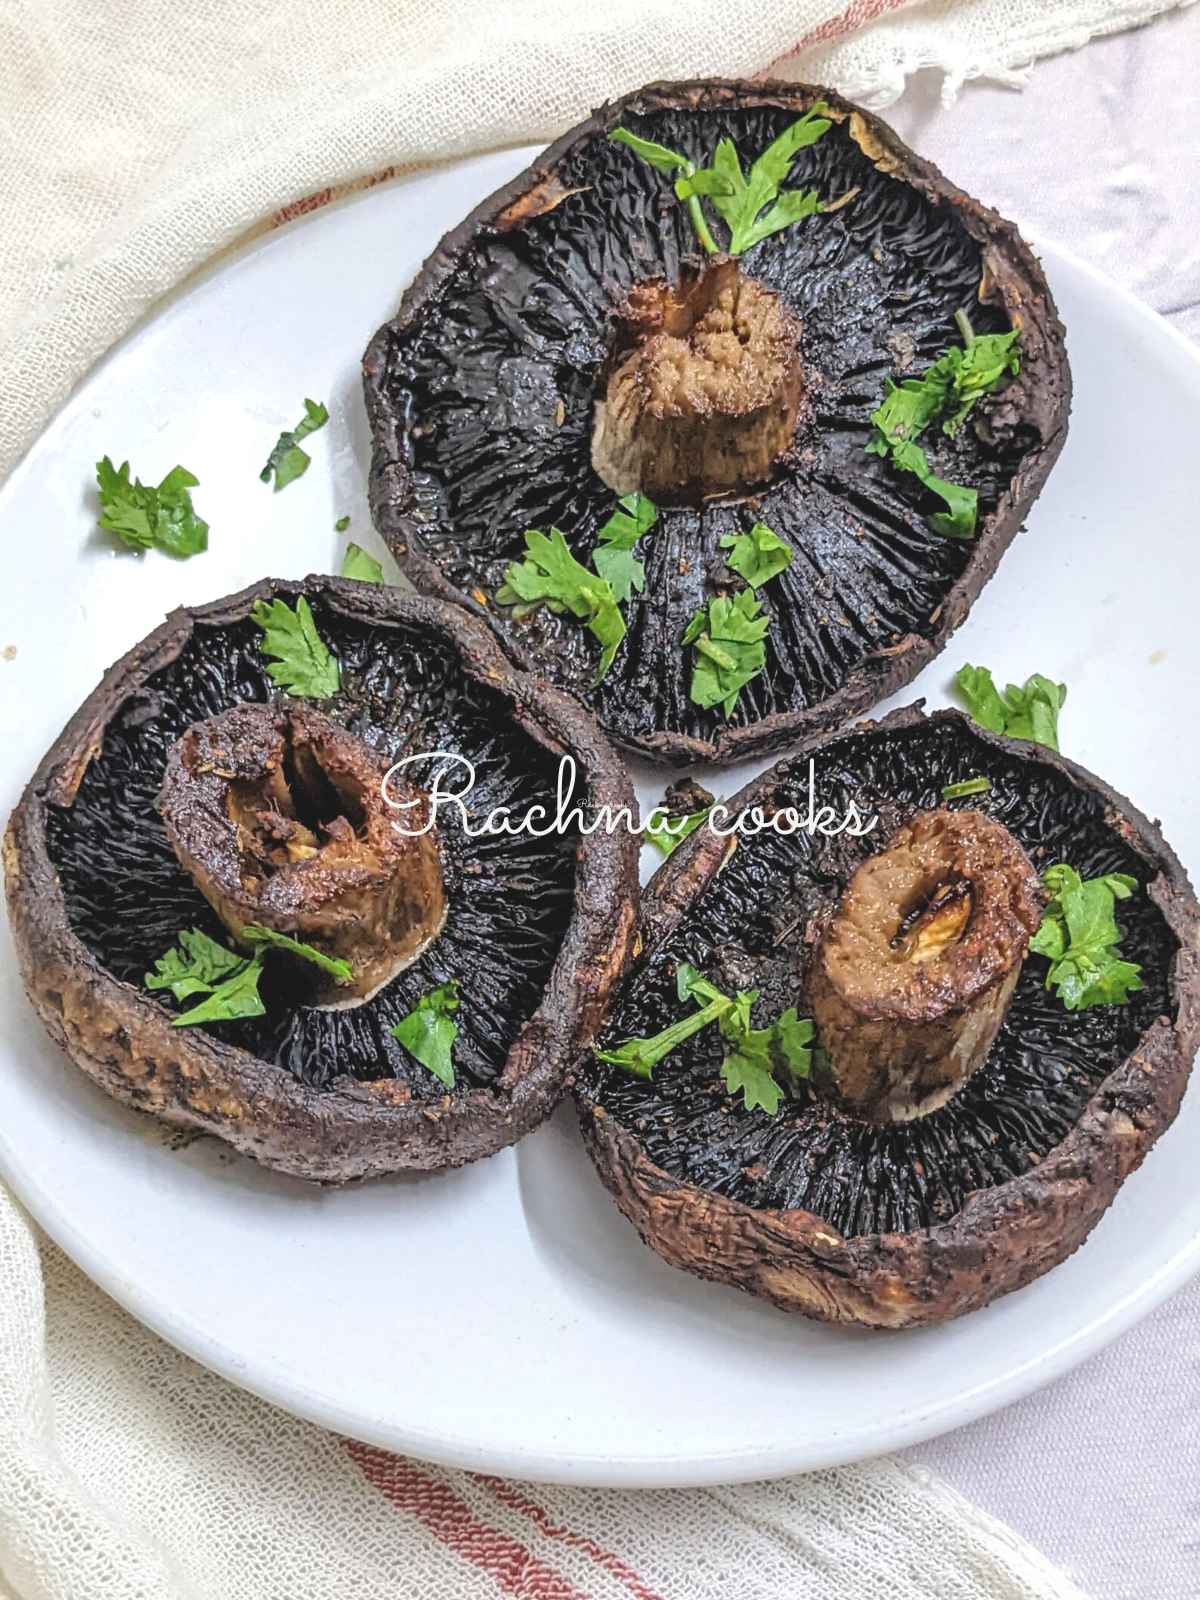 3 delicious air fried portobello mushrooms stalk side up on a glass plate garnished with cilantro